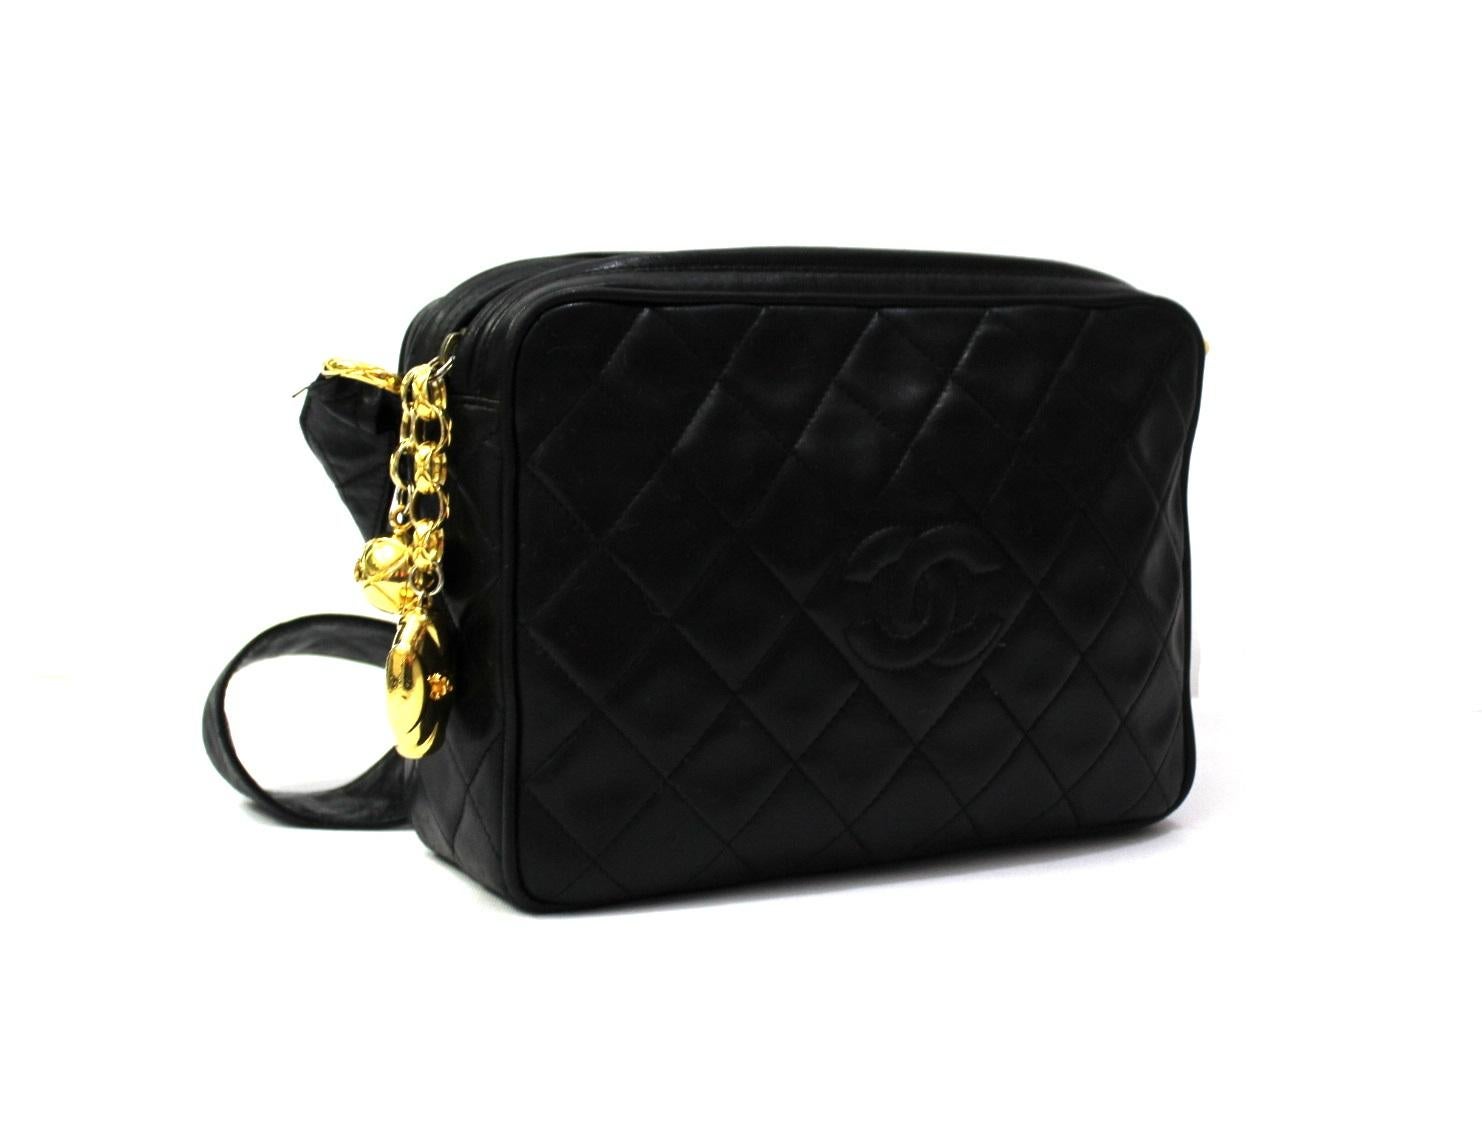 Chanel Camera Bag format made of black leather with golden hardware.
Zip closure, internally large enough.
Equipped with leather shoulder strap. The bag despite being a vintage product is in good condition.